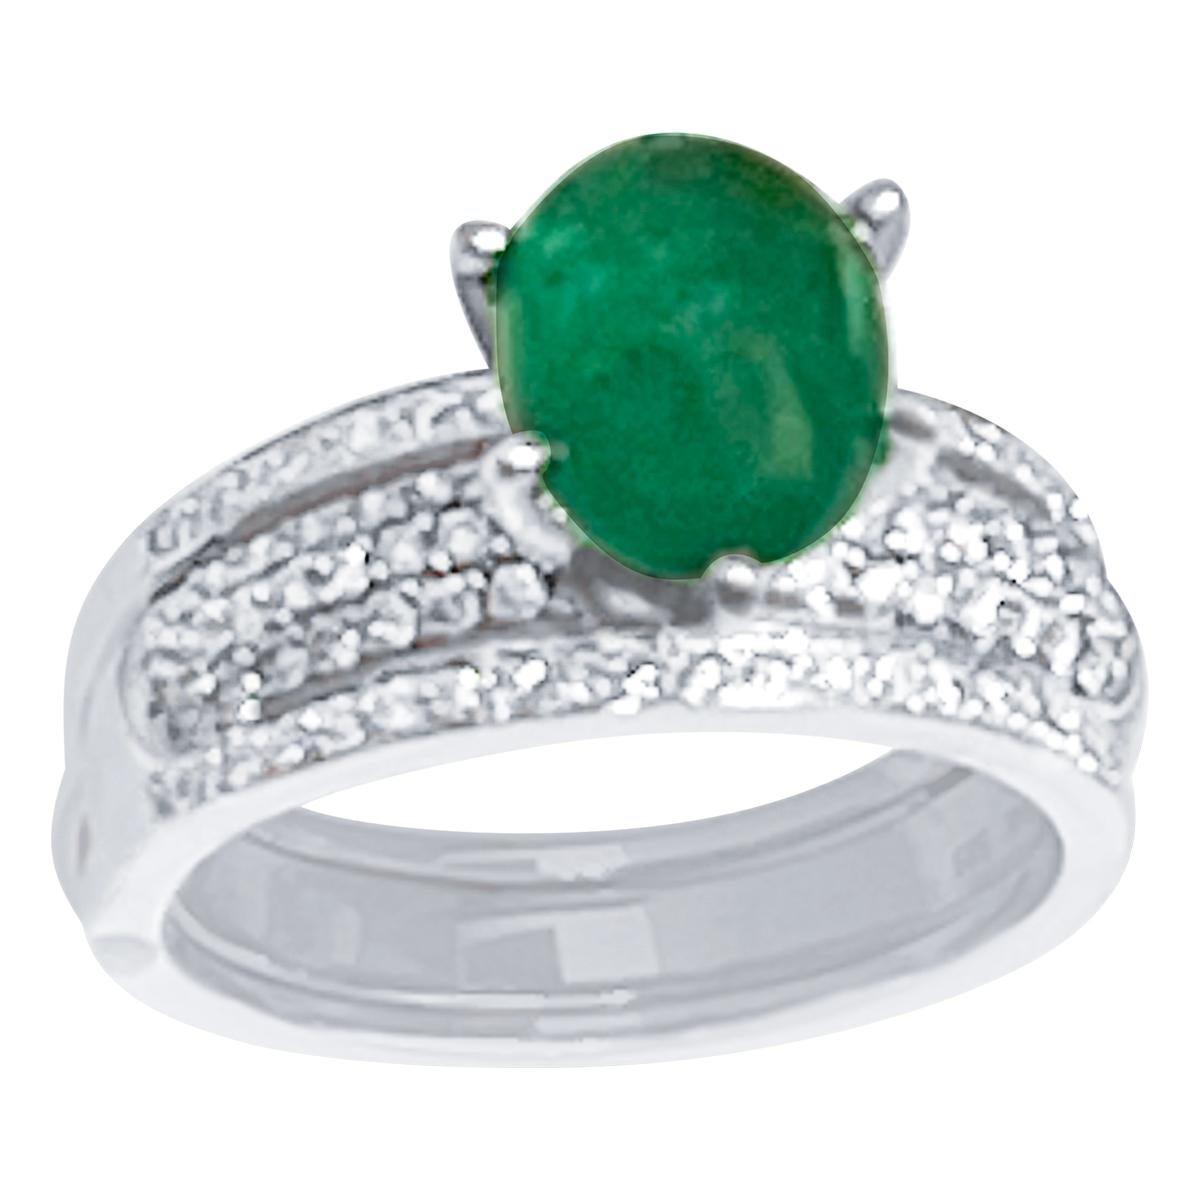 2 Carat Zambian Emerald Cabochon & Diamond Cocktail  Ring 14 Kt Gold with Band For Sale